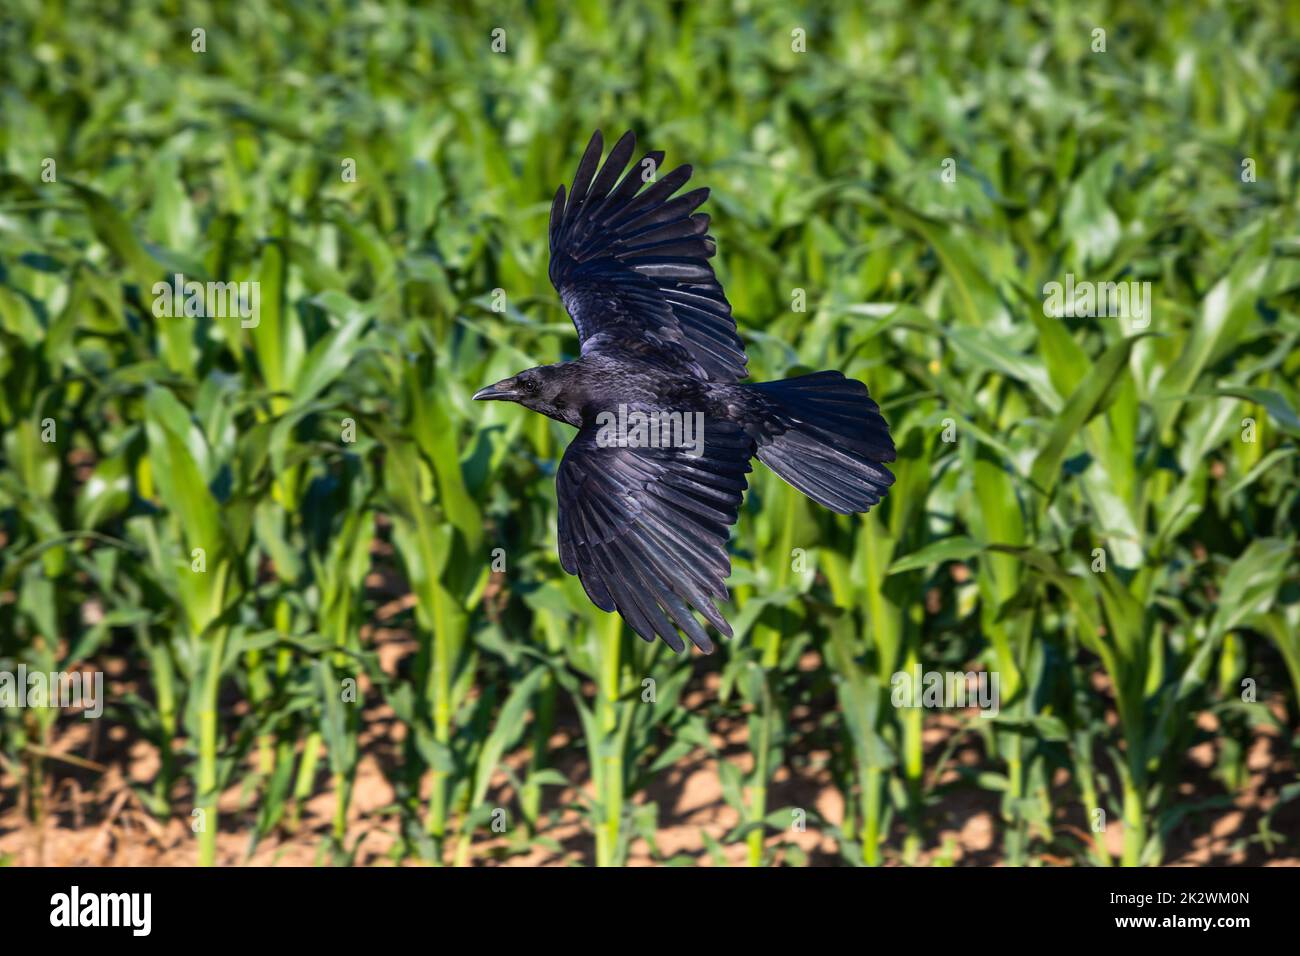 crow with spread wings soars above corn field Stock Photo